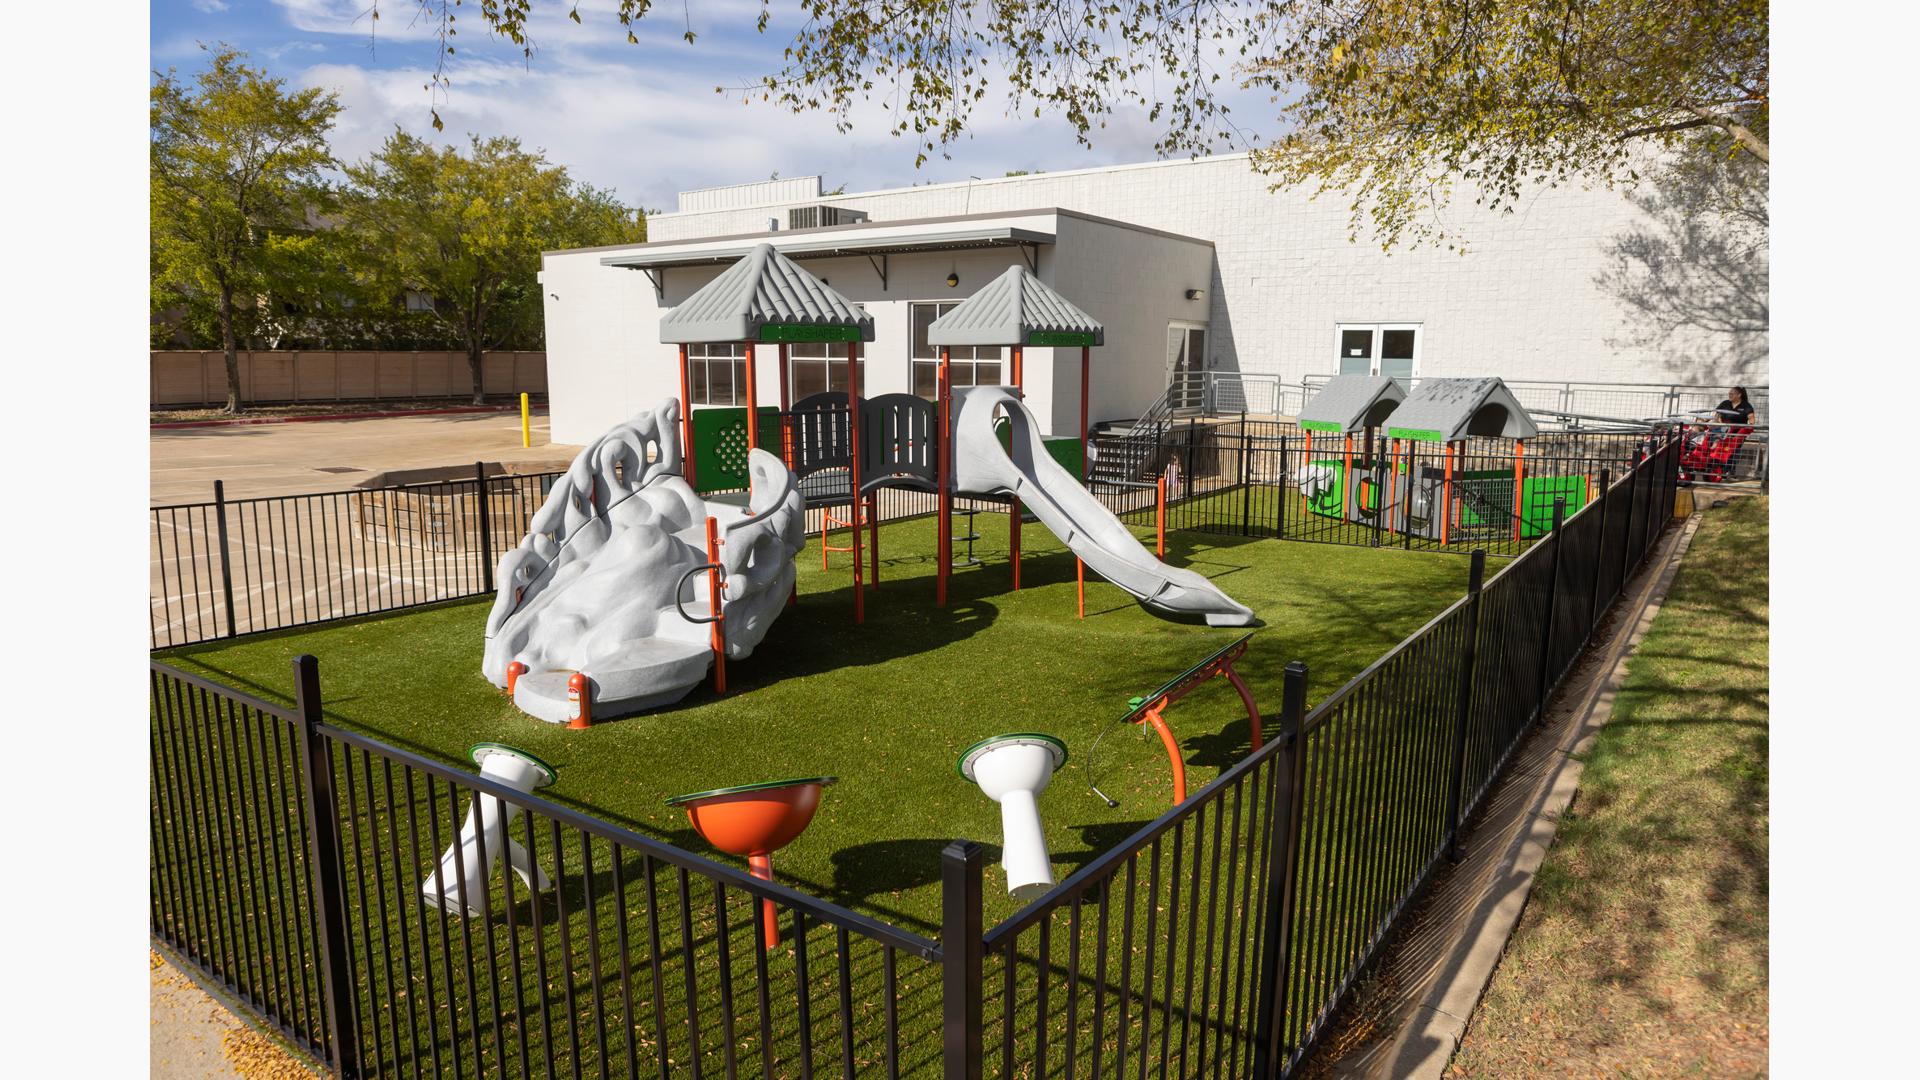 A black iron fence surrounds a play area with play structure, outdoor musical instruments and play panels for young children outside a white brick building. 